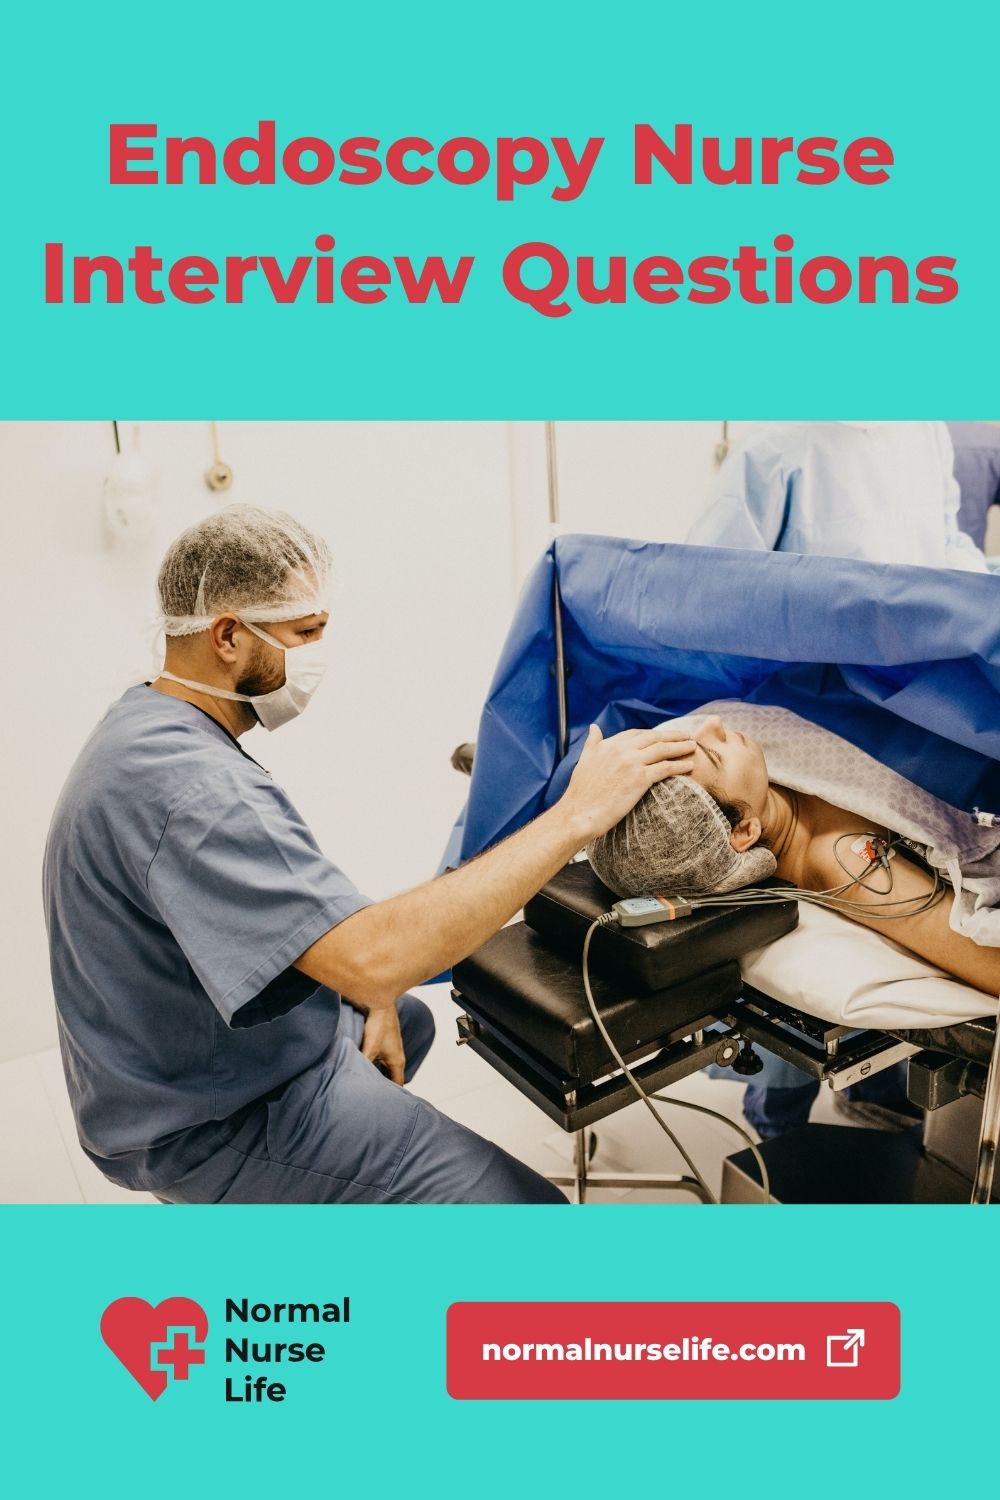 Endoscopy nurse interview questions and answers